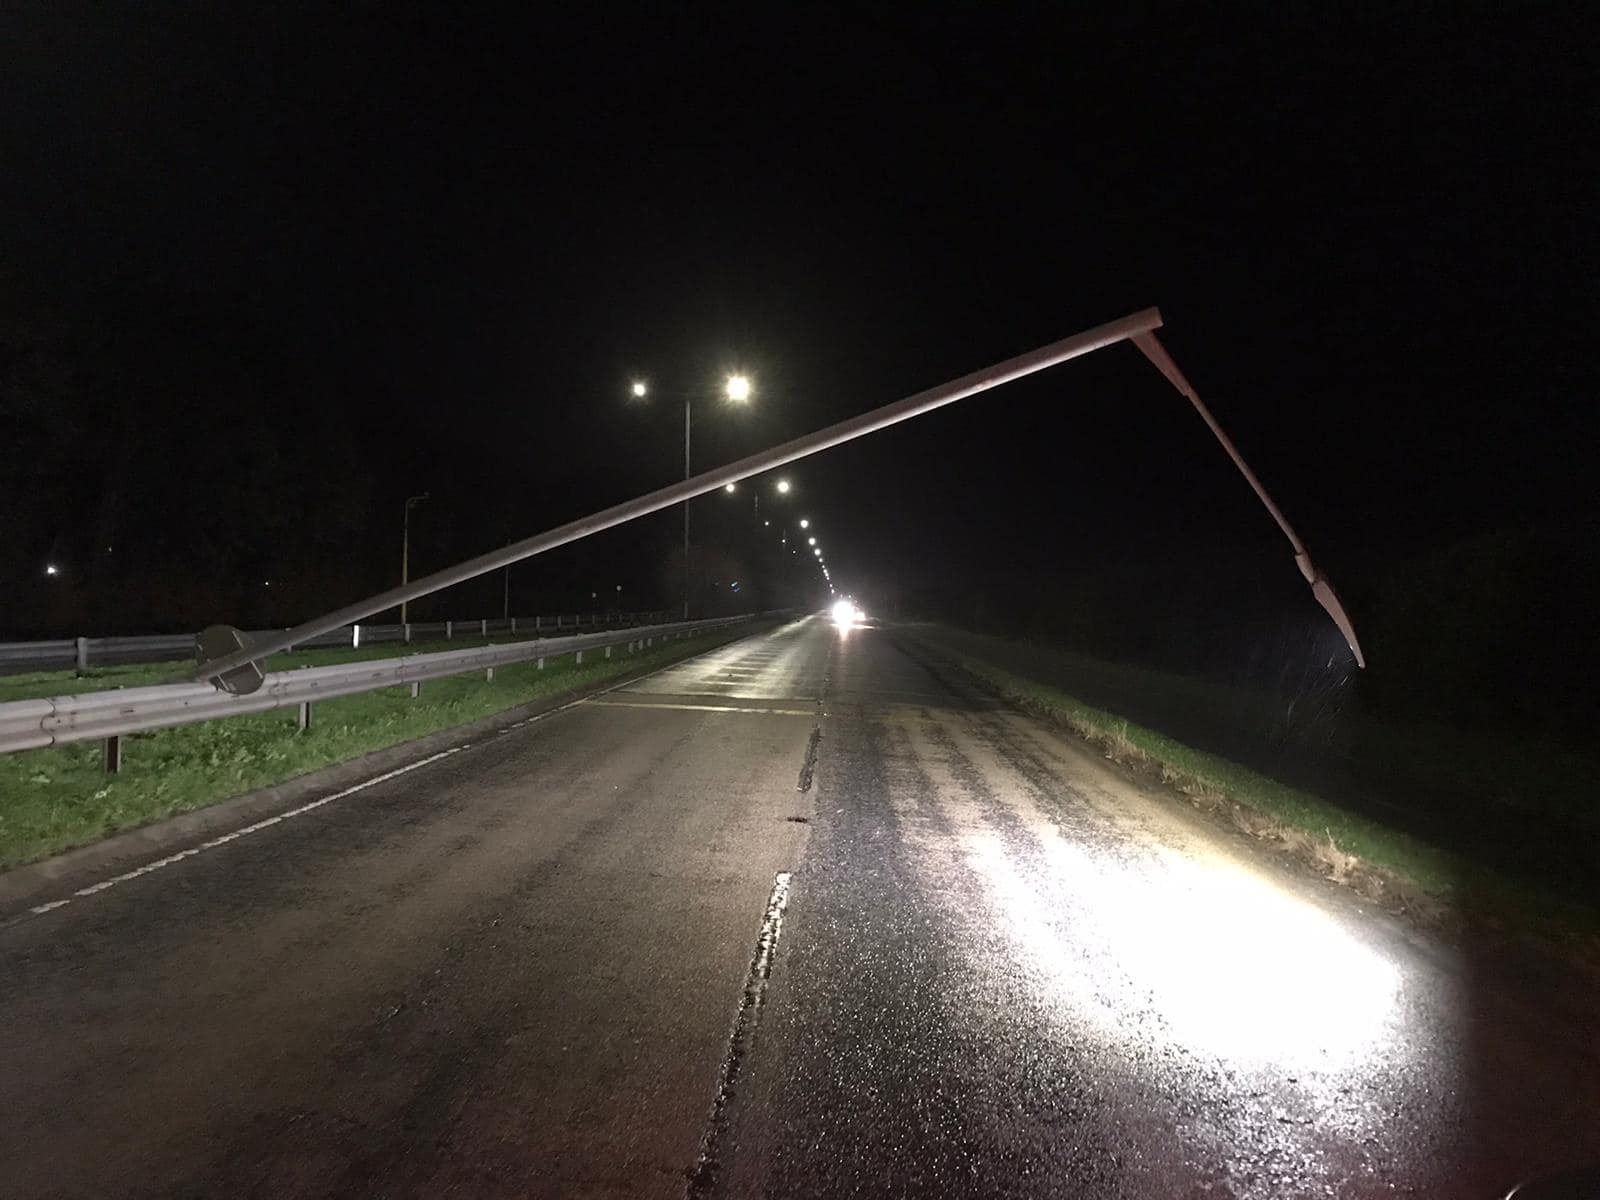 A lamp post has fallen on Tarleton Bypass, near Banks roundabout. Photo by Tom Hamer